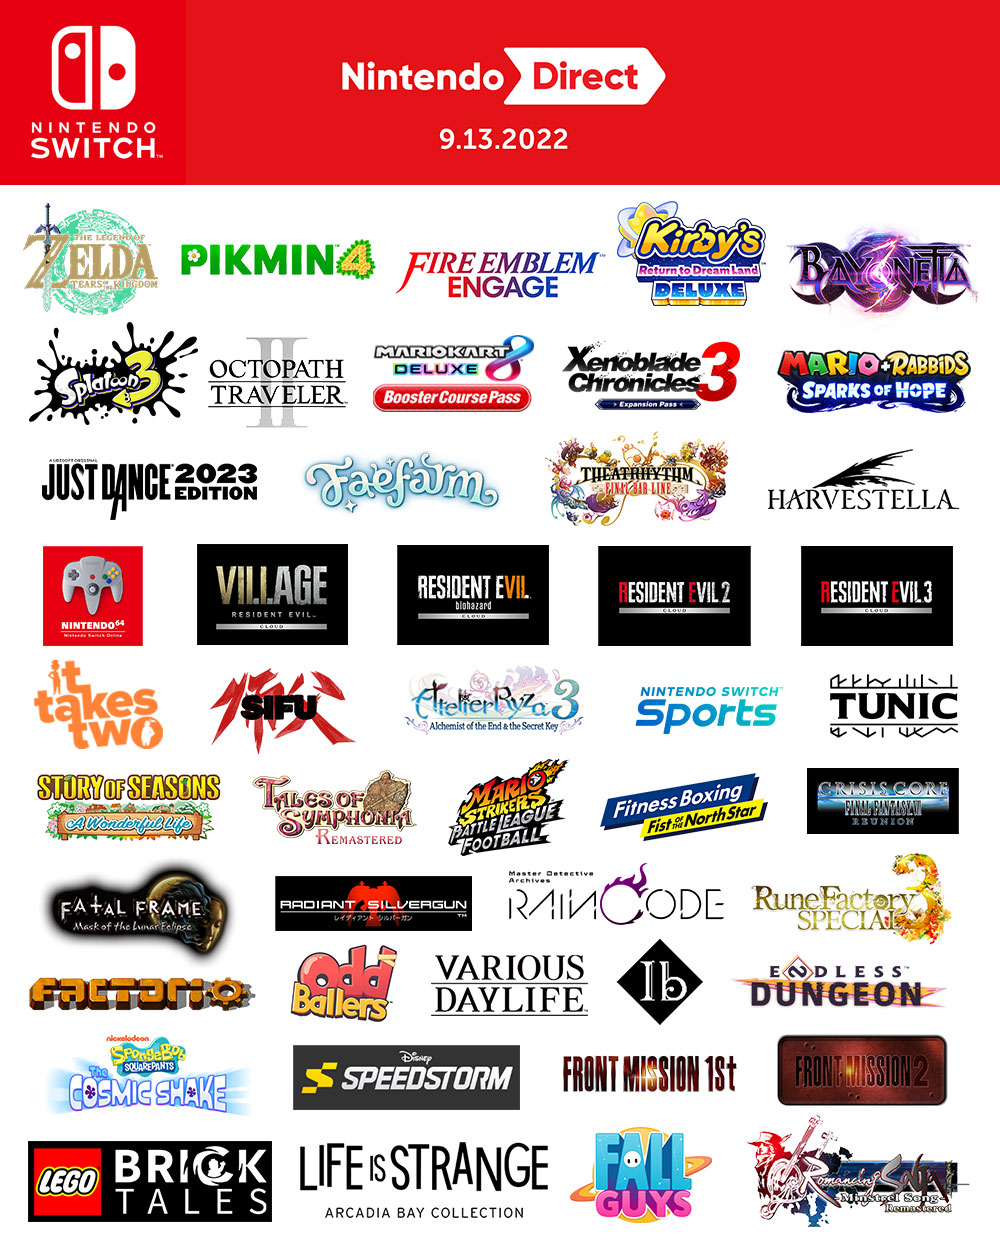 Nintendo Shares Infographic Recapping Its September 2022 Direct